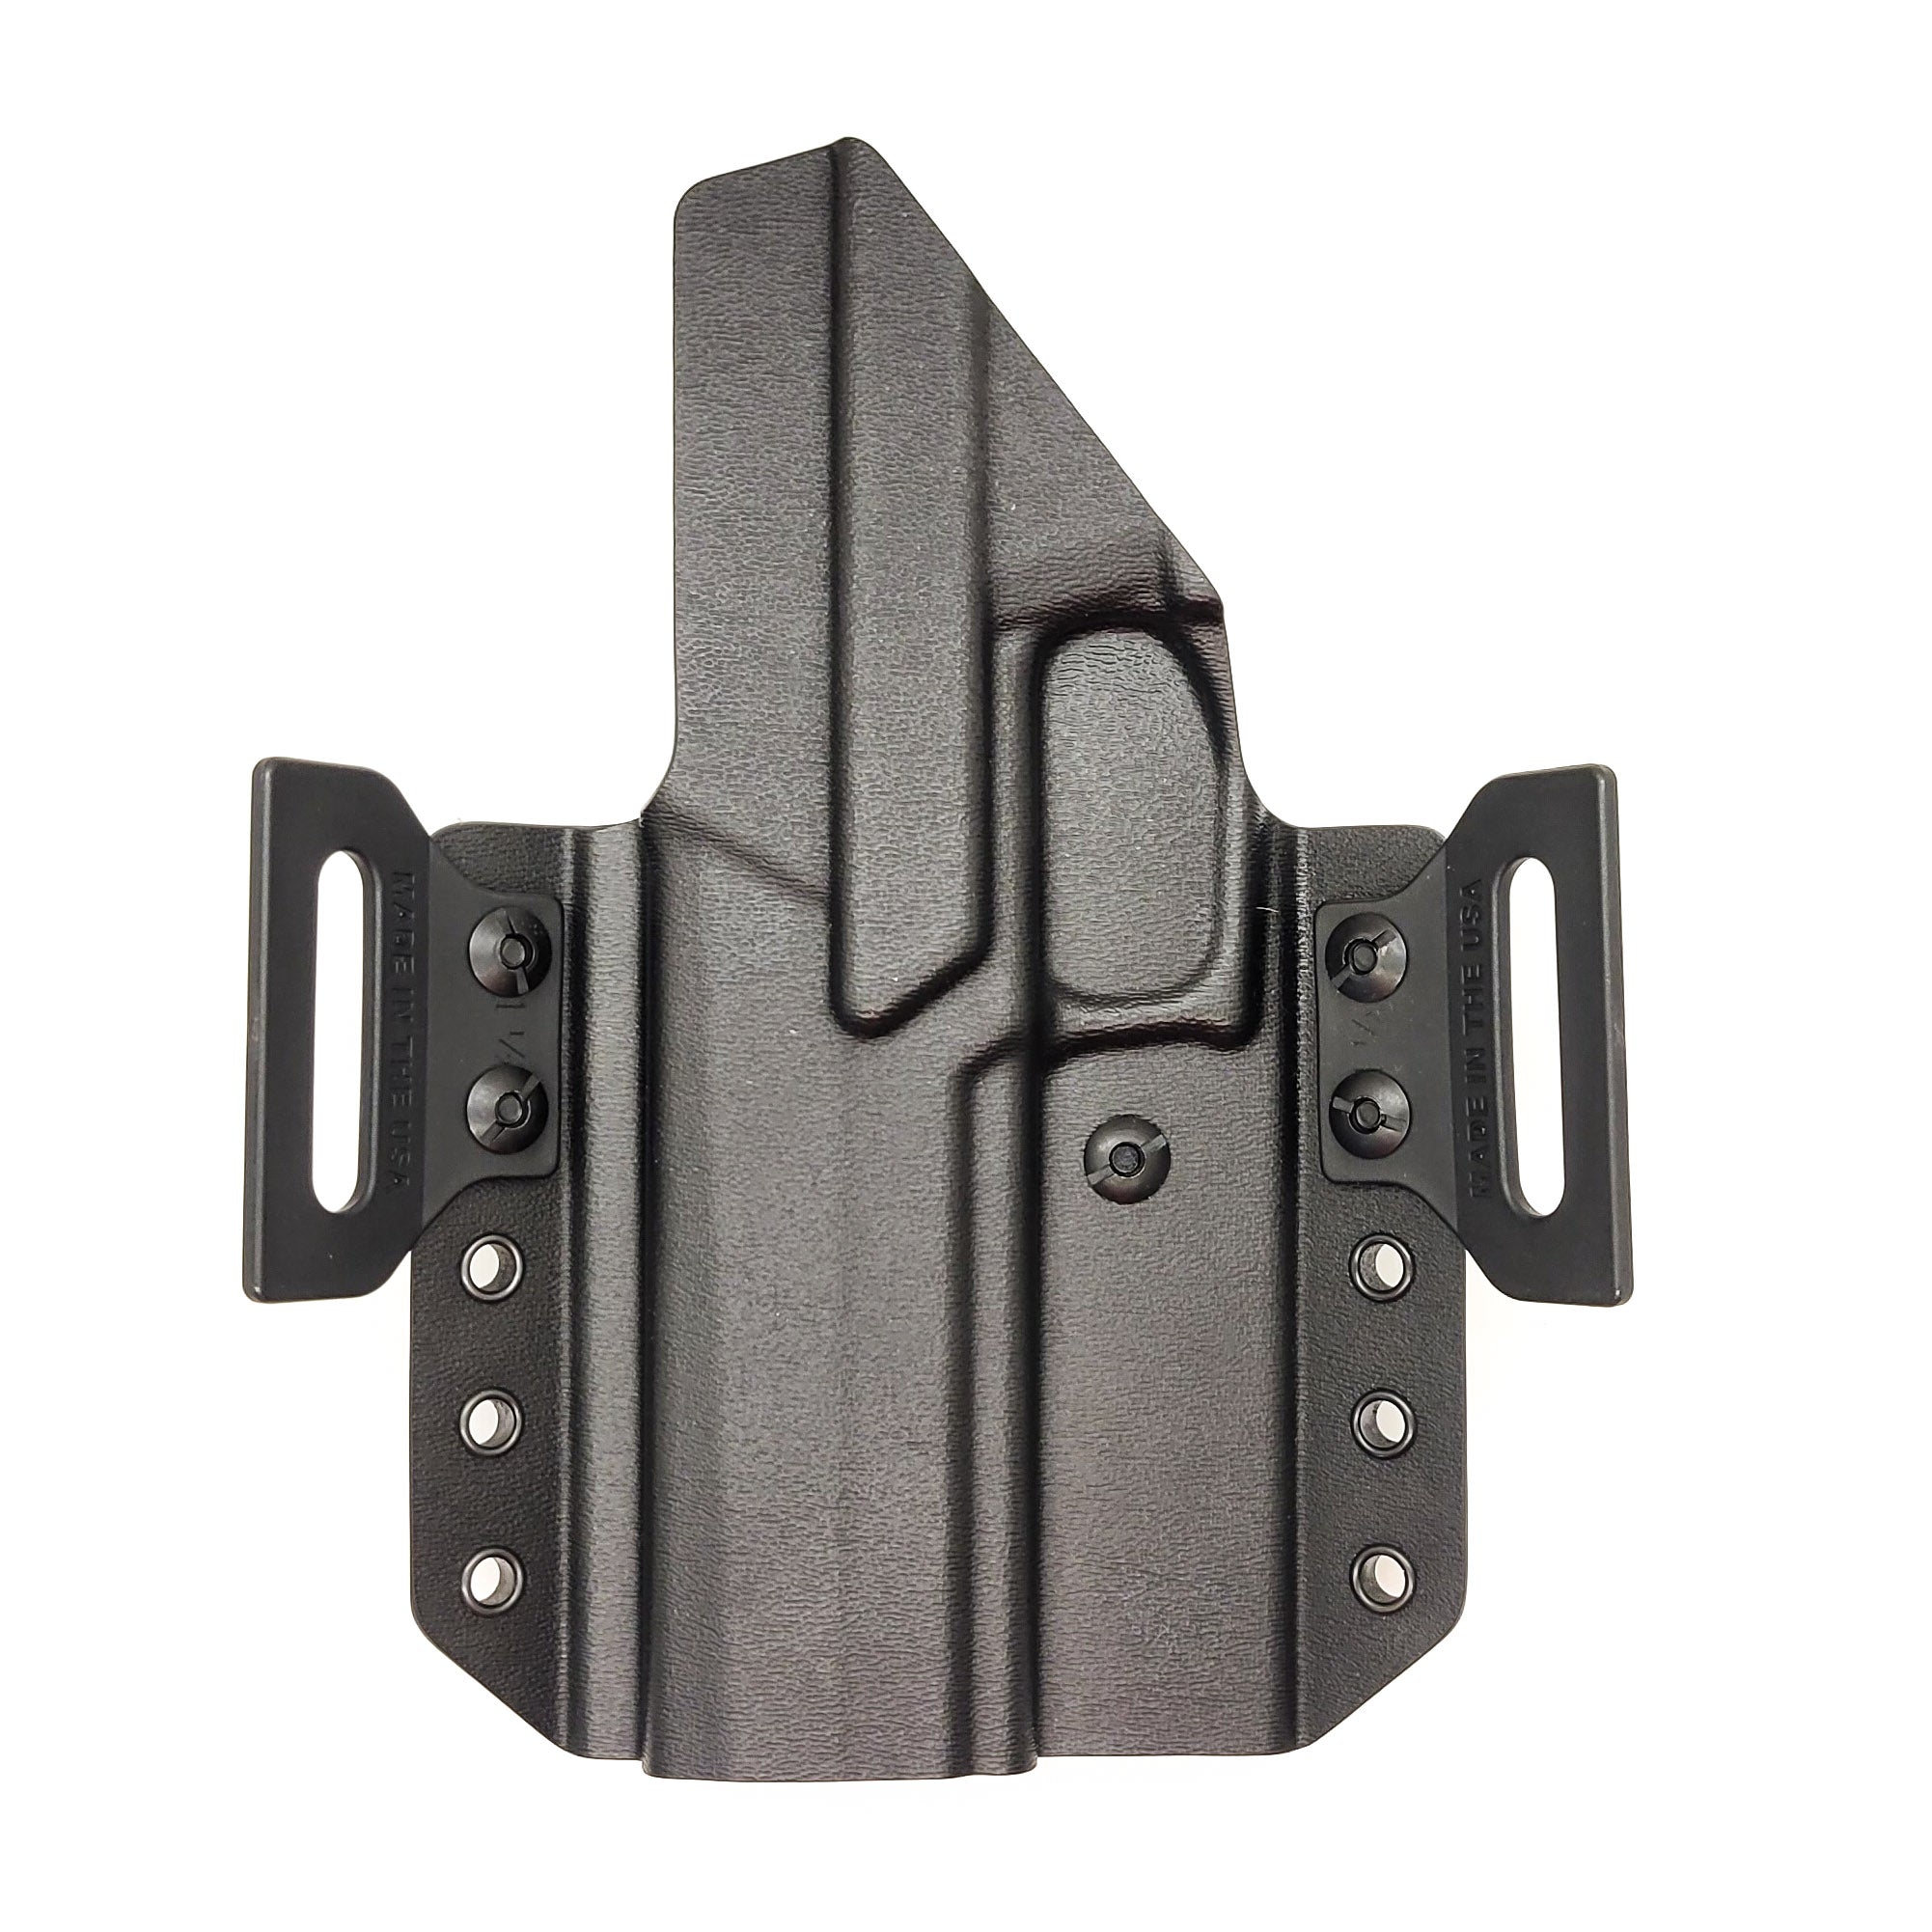 Outside Waistband Pancake Style Kydex holster designed to fit the Sig Sauer 10MM P320-XTEN.  Full sweat guard, adjustable retention, open muzzle and profiled for a red dot sight. Proudly made in the USA for veterans and law enforcement. 10 MM P320-XTEN, P320 X Ten or P 320  XTEN. 10 for the win!